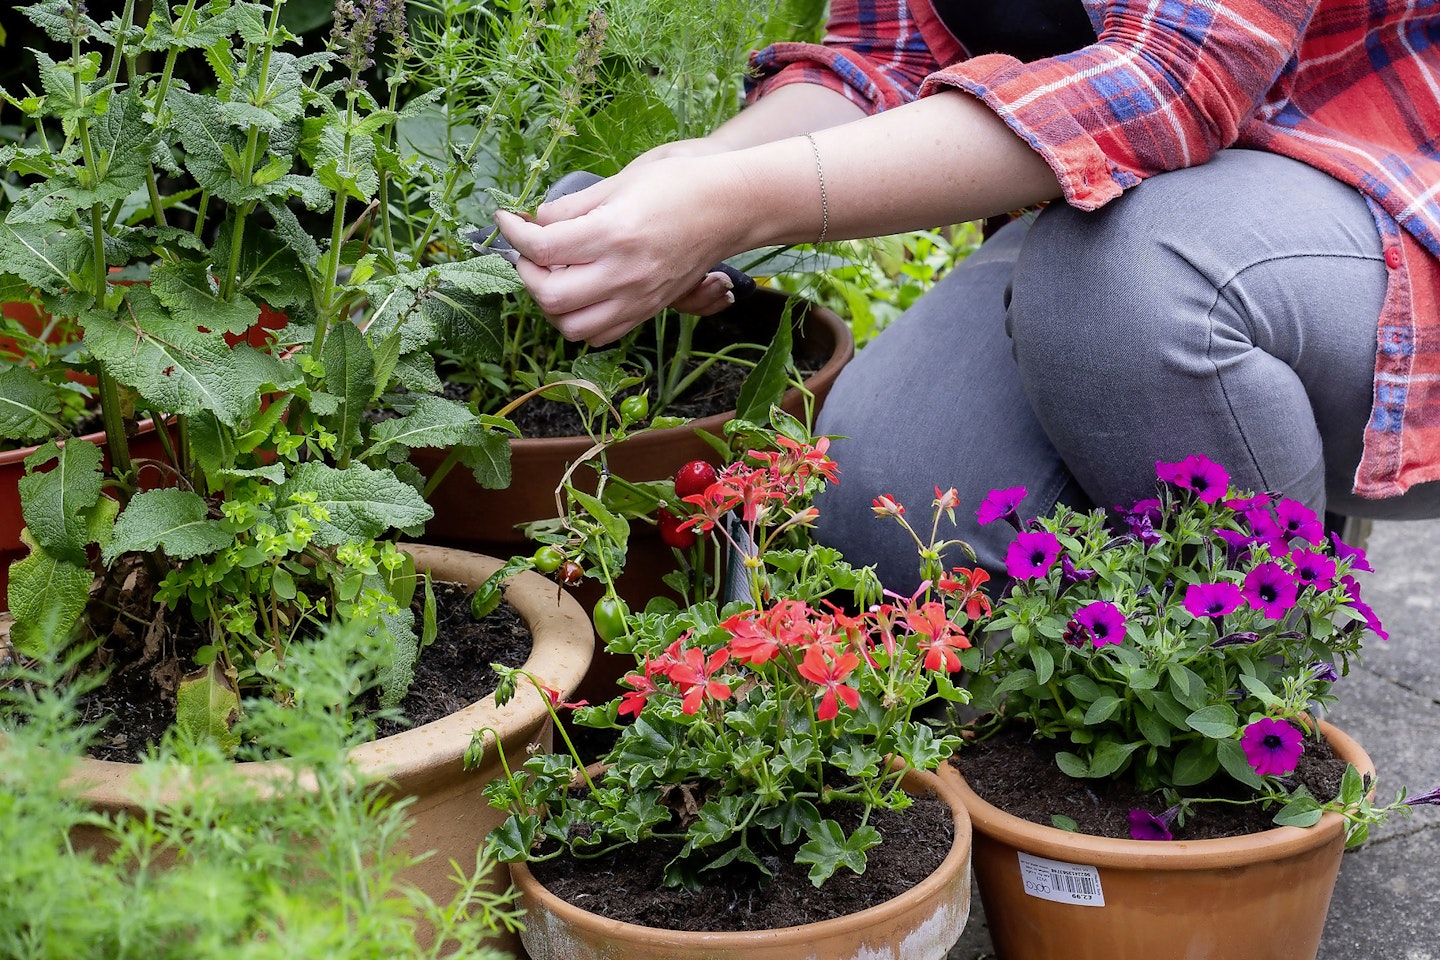 Trimming plants the correct way will ensure a second wave of flowers